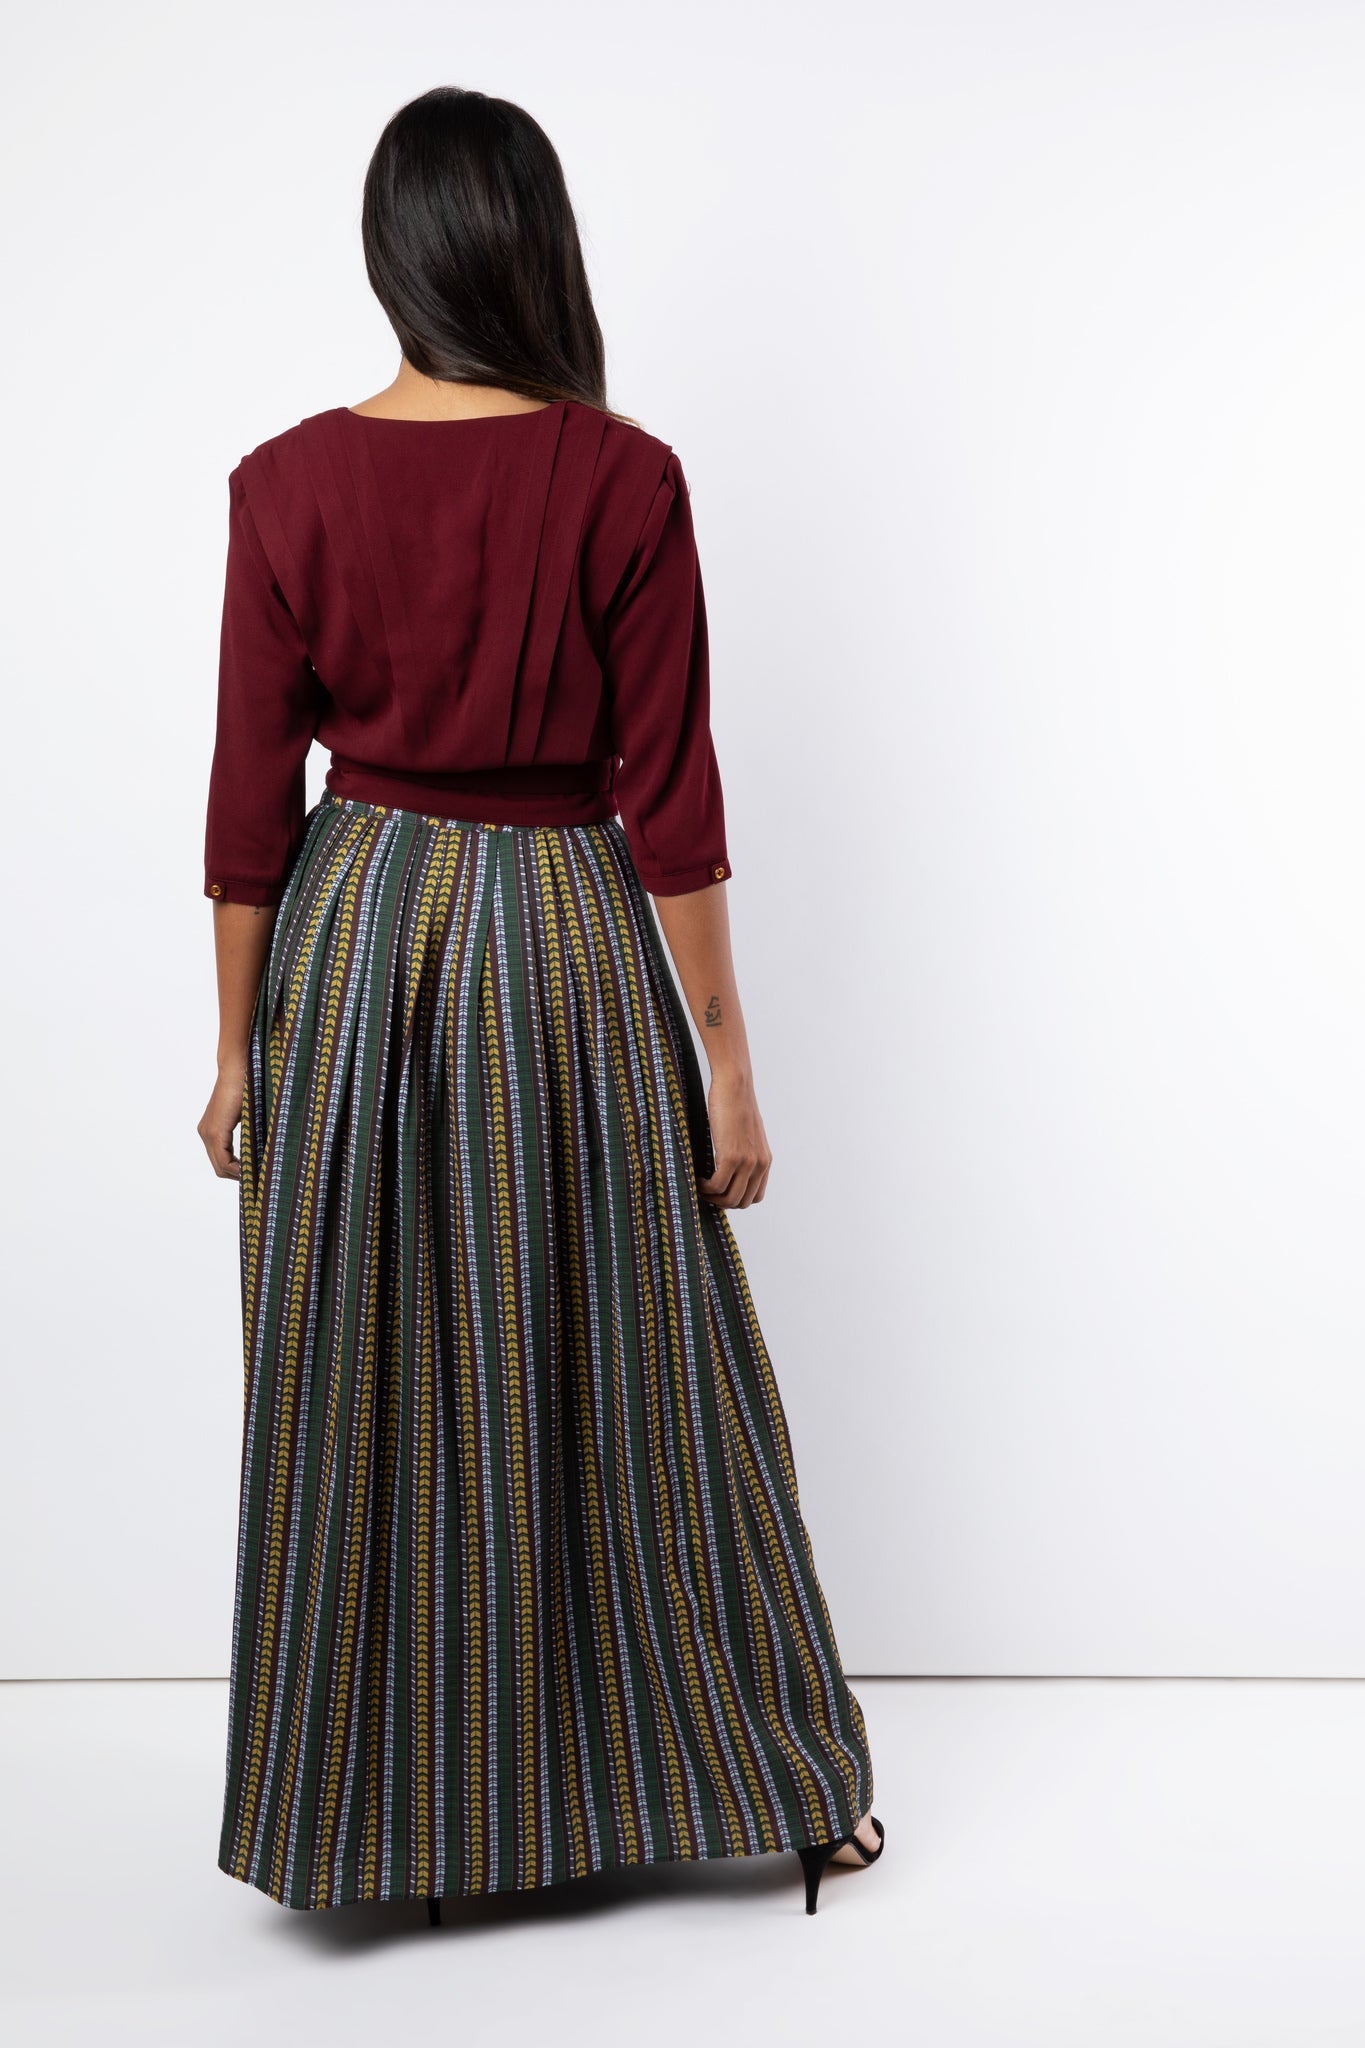 Back view of maroon pleated shirt and printed maxi skirt